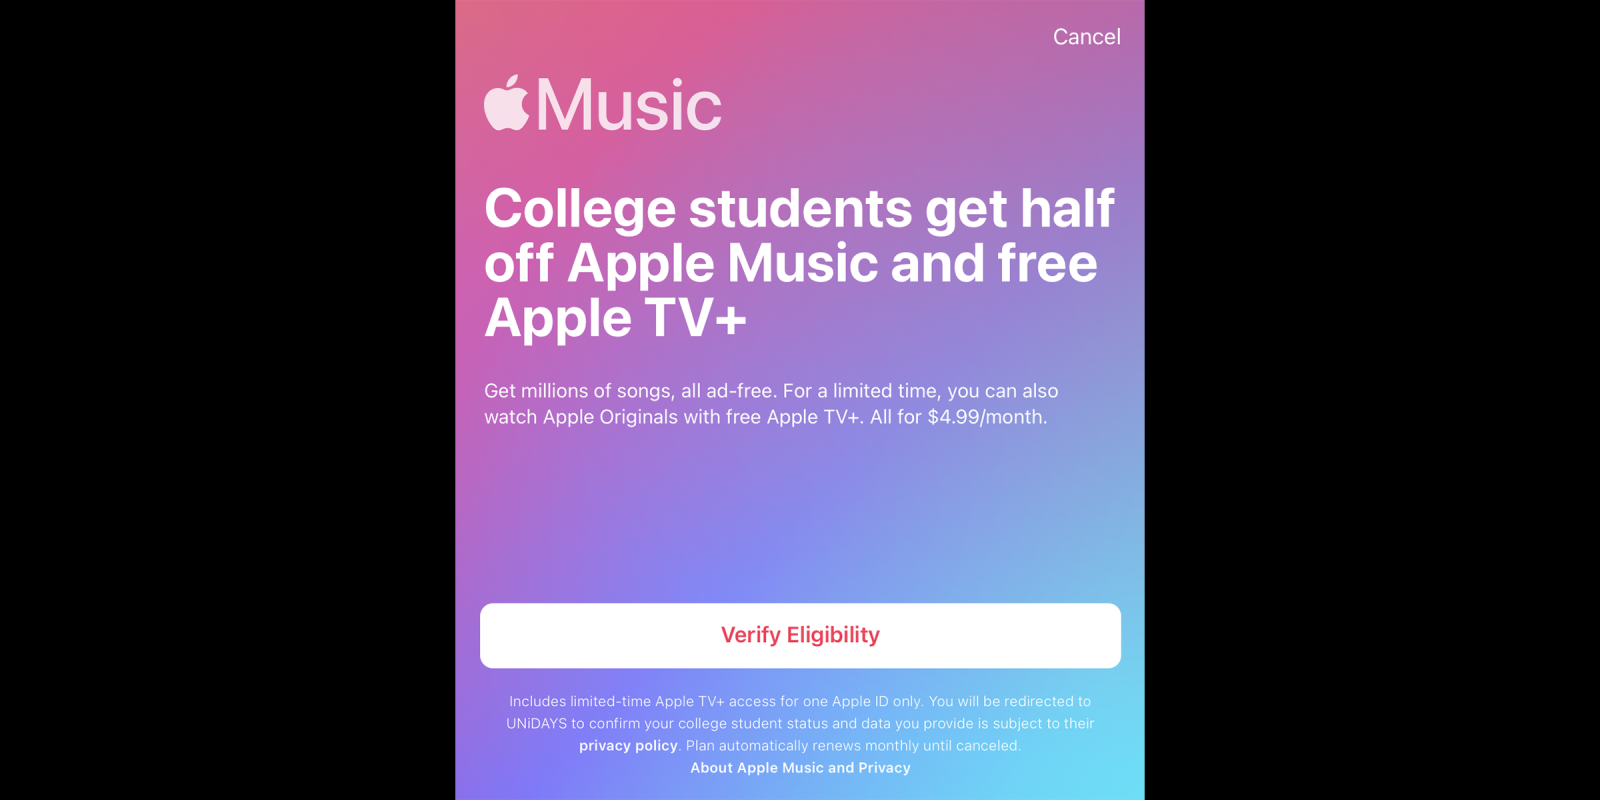 The Apple Music free trial for students